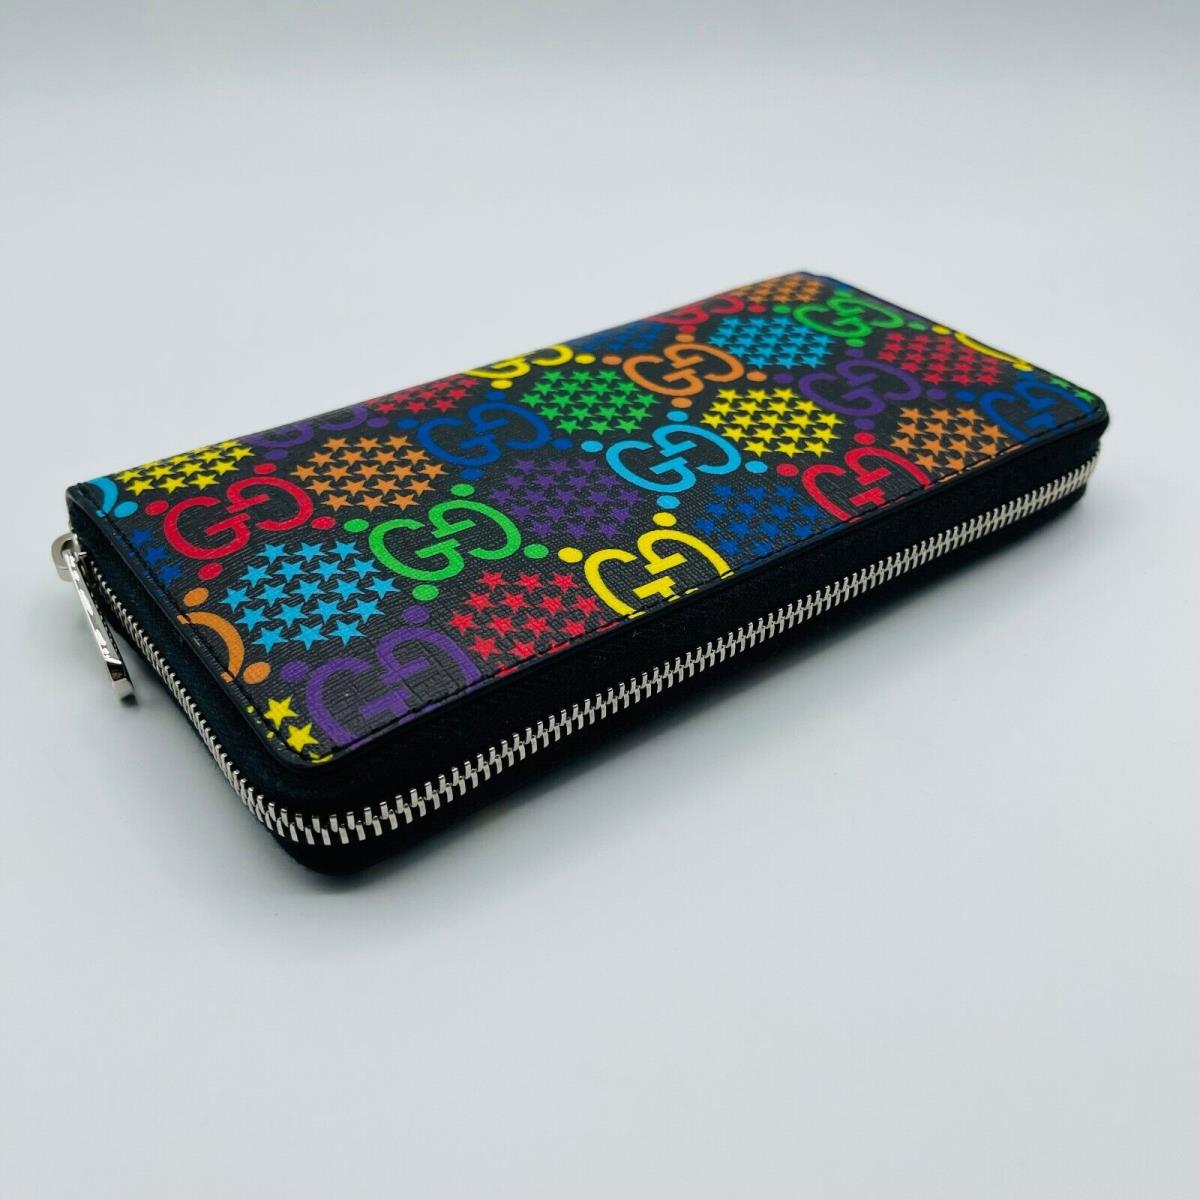 Gucci Unisex Black/Rainbow GG Supreme Psychedelic Card Holder Wallet 601098  1058